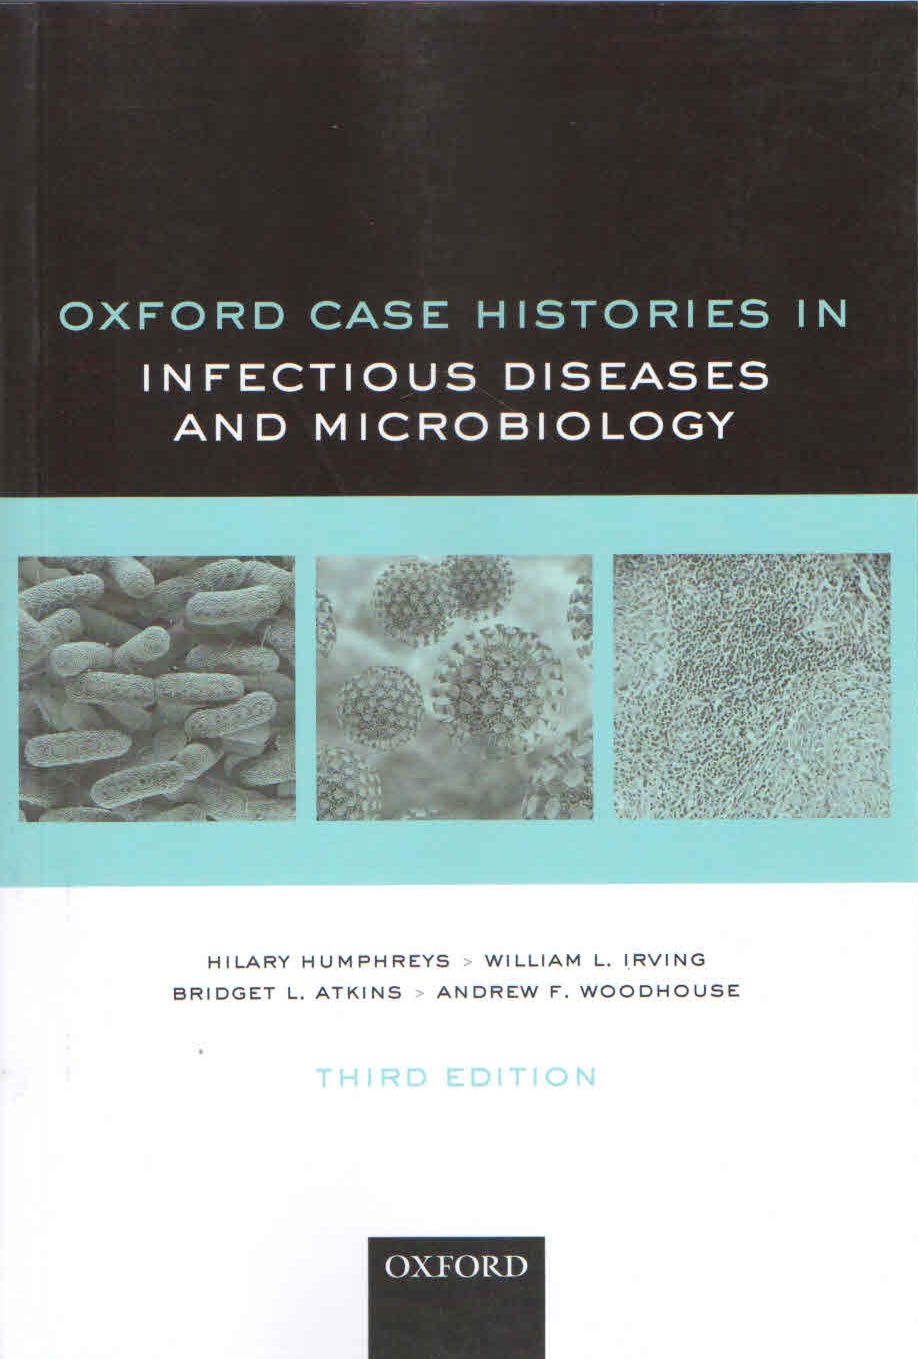 

exclusive-publishers/oxford-university-press/oxford-case-histories-in-infectious-diseases-and-microbiology-9780198846482